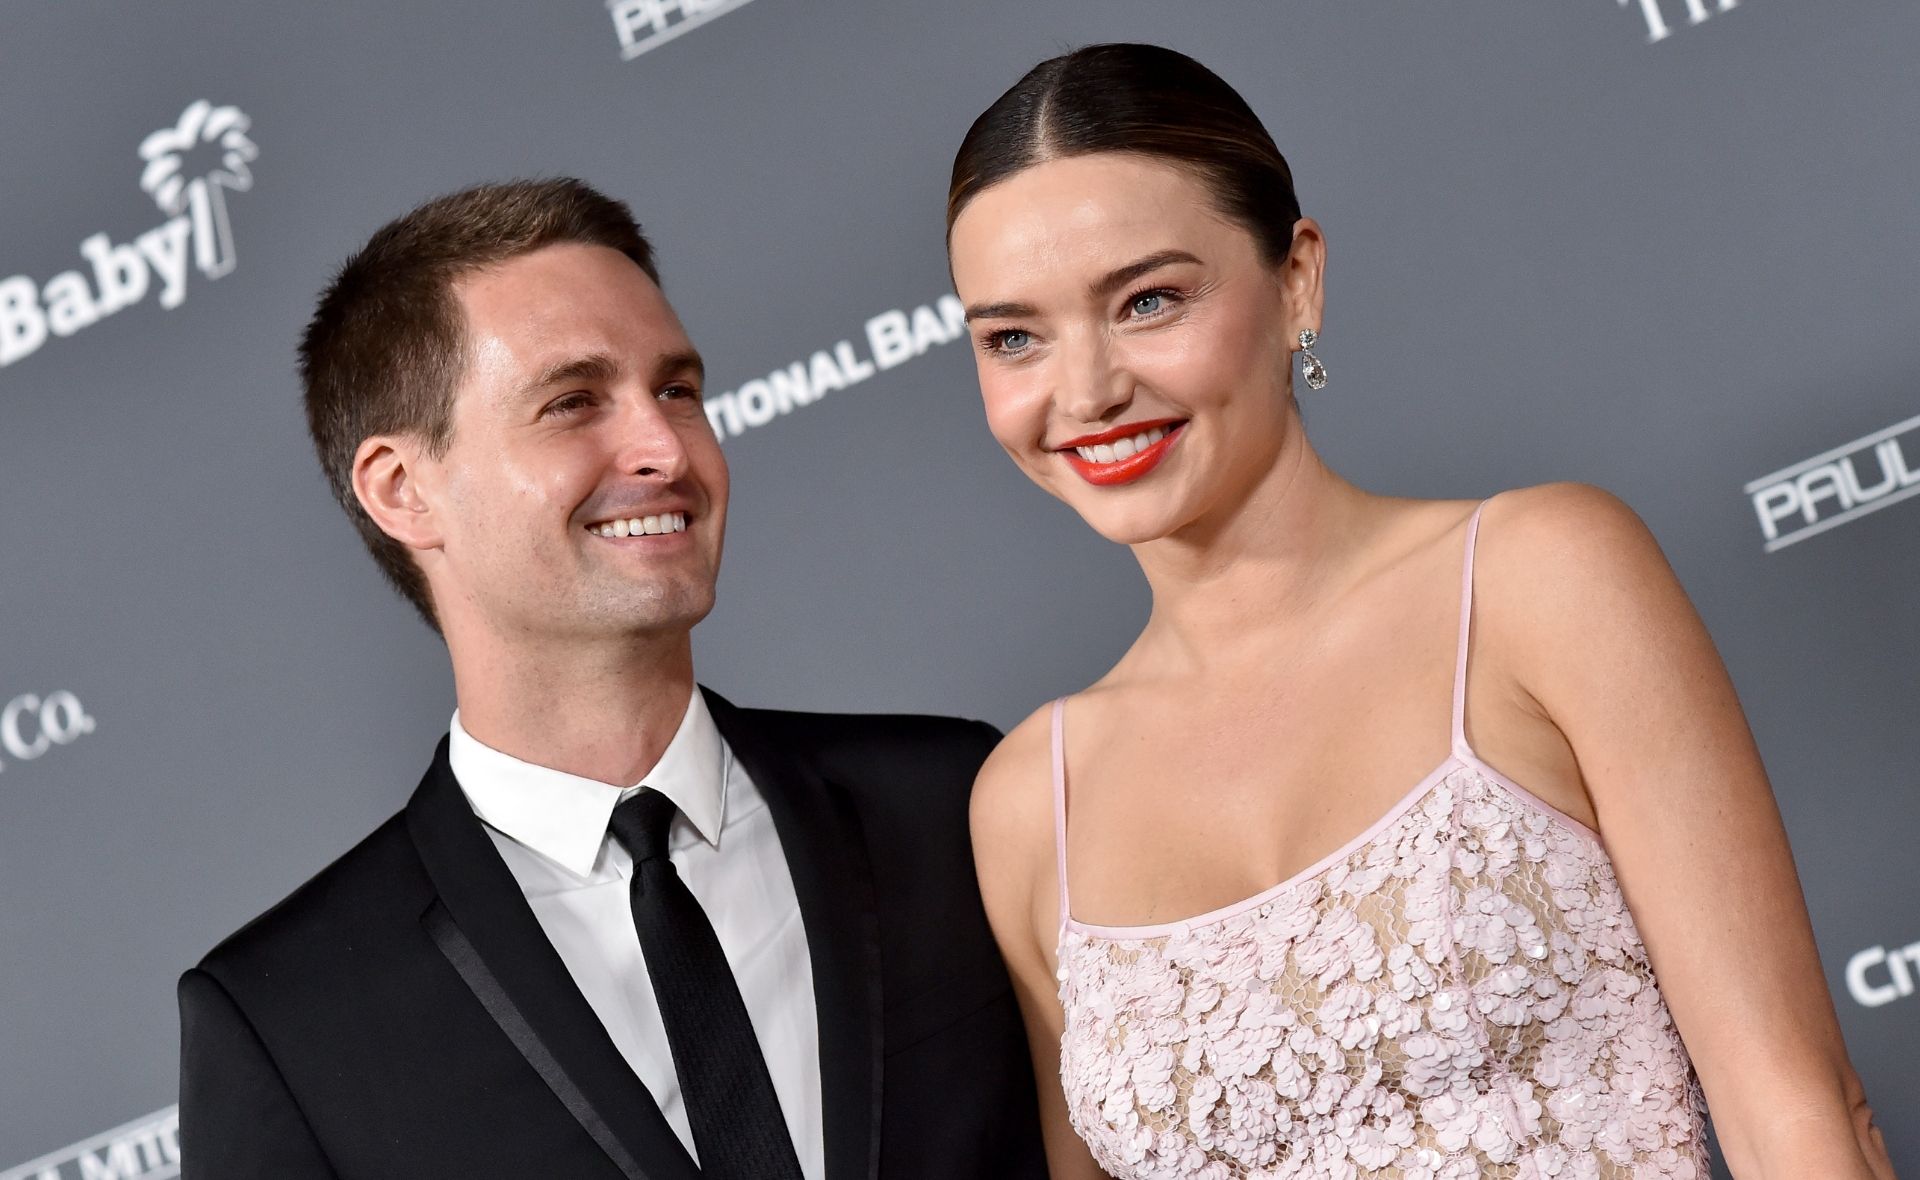 How Miranda Kerr’s clever text sealed the deal with her billionaire husband, Evan Spiegel